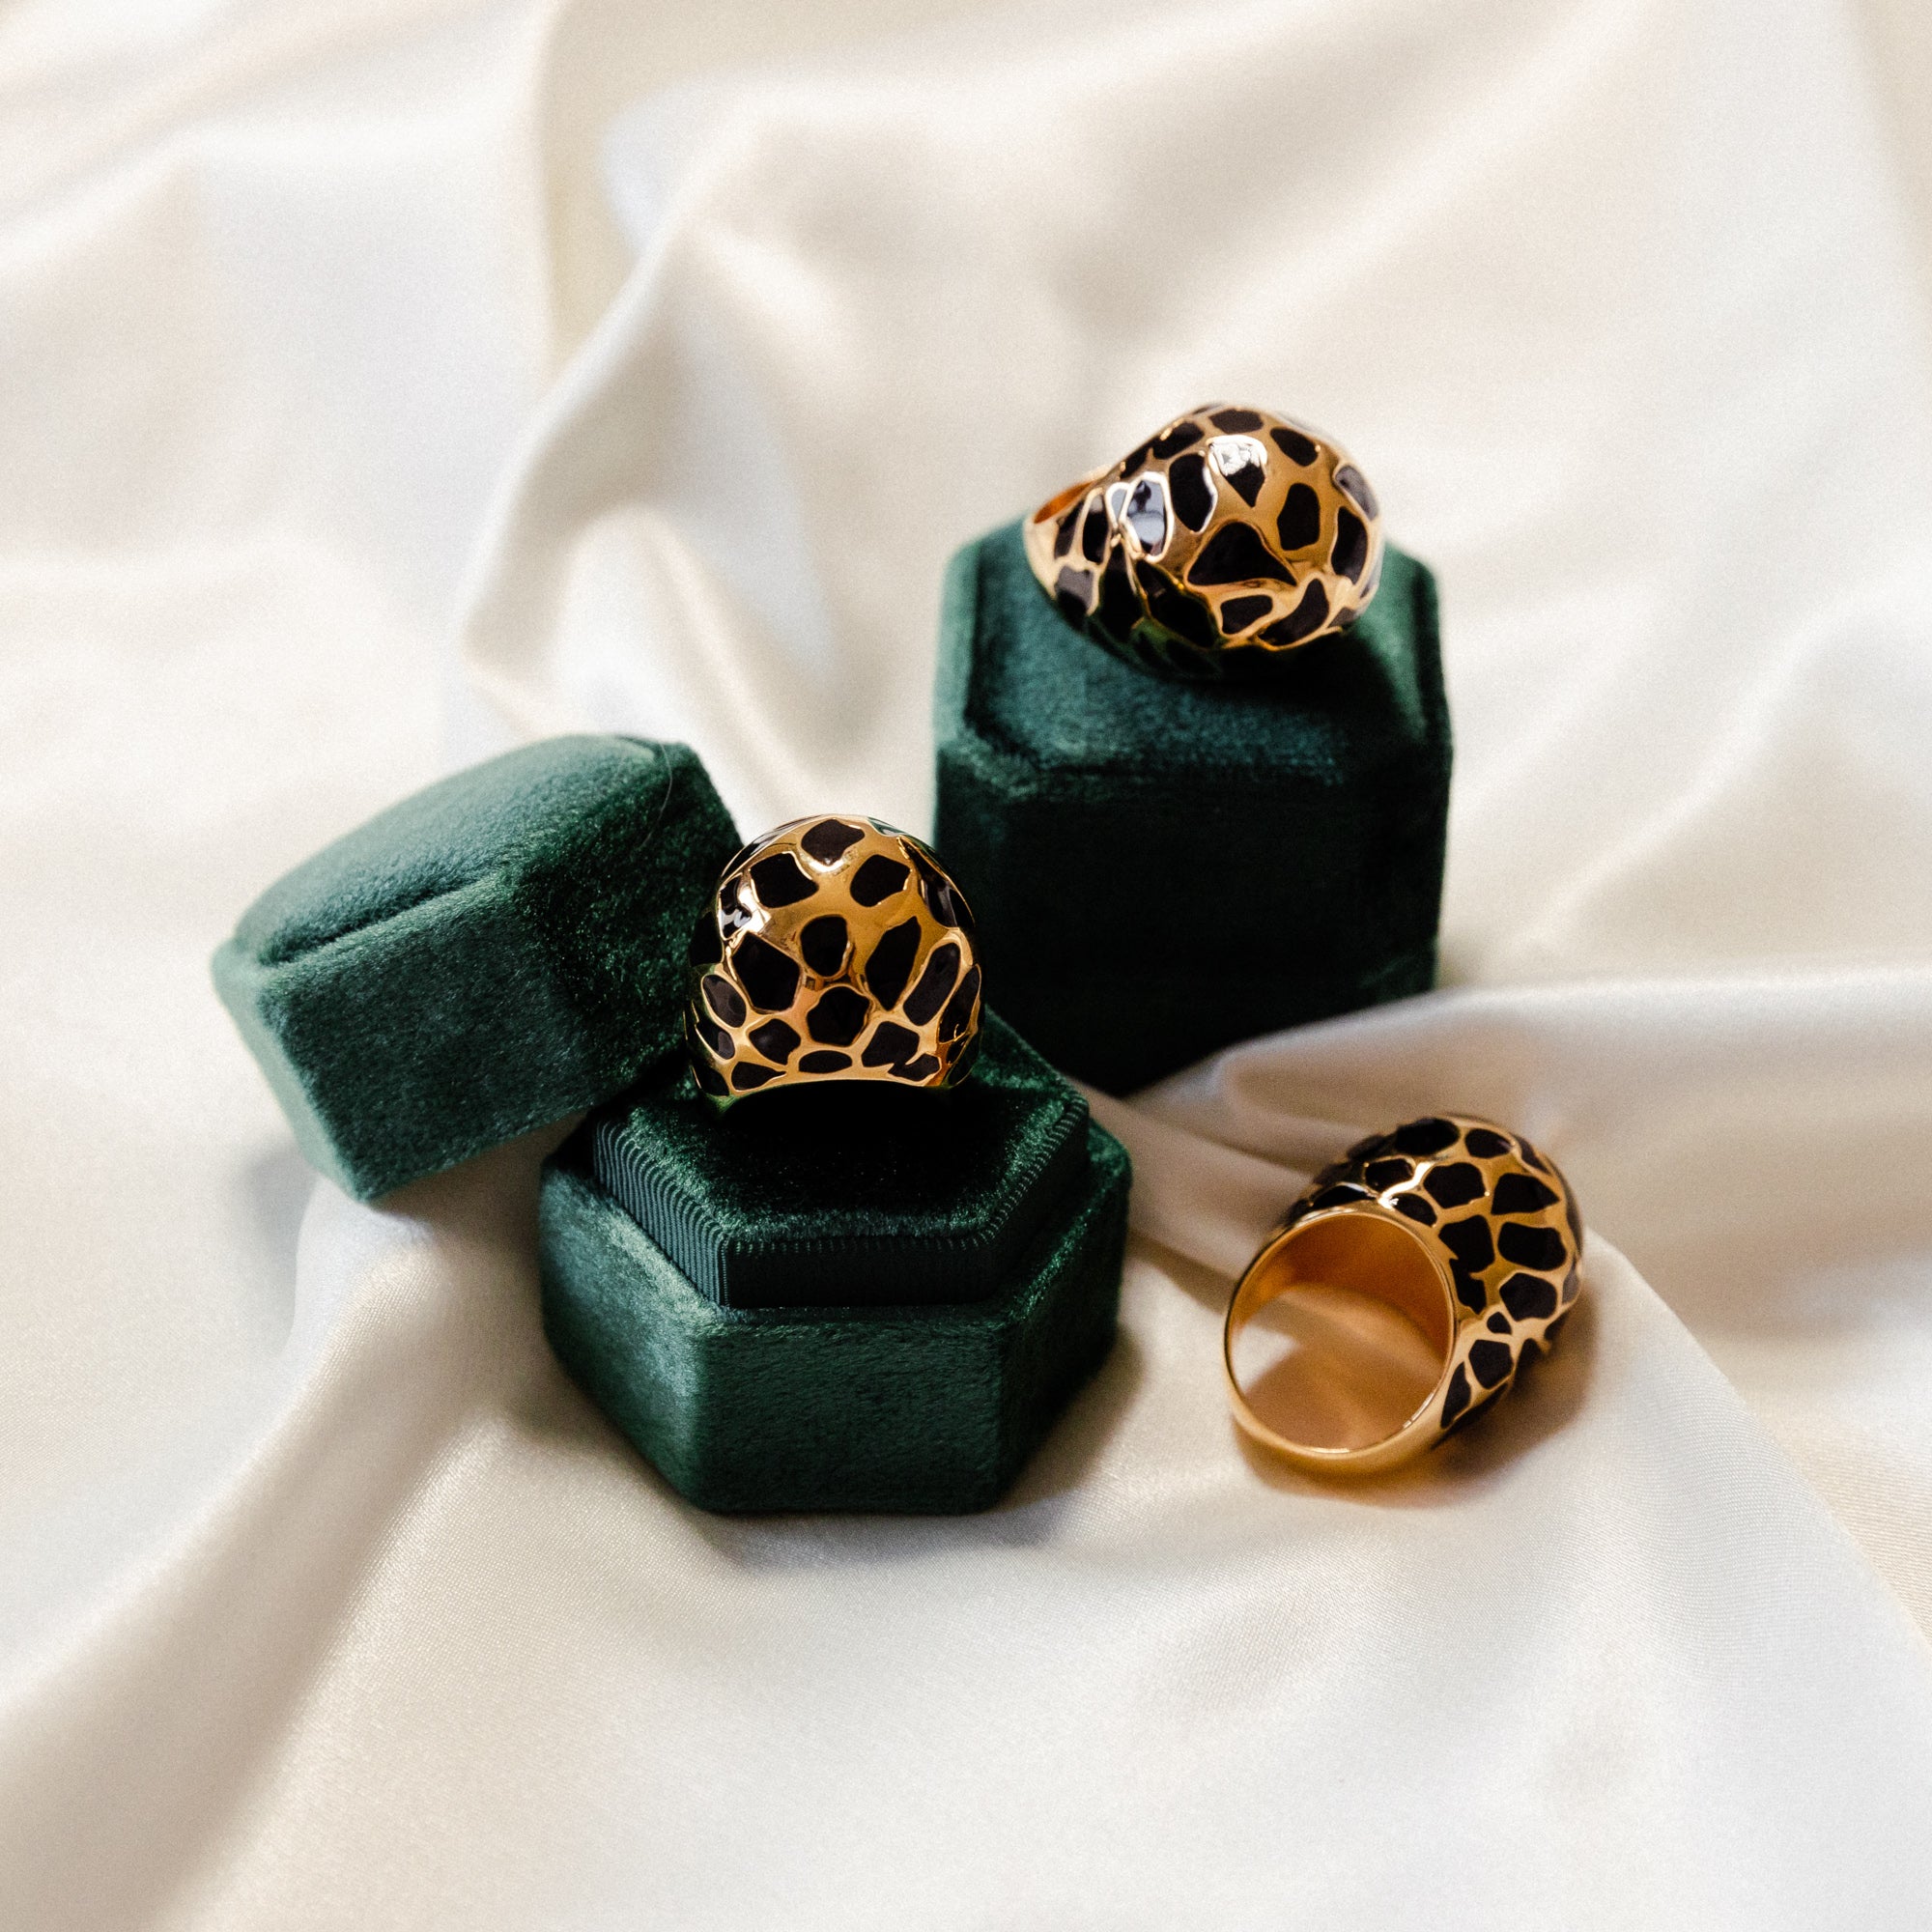 Leopard Dome Ring by Erin Fader Jewelry